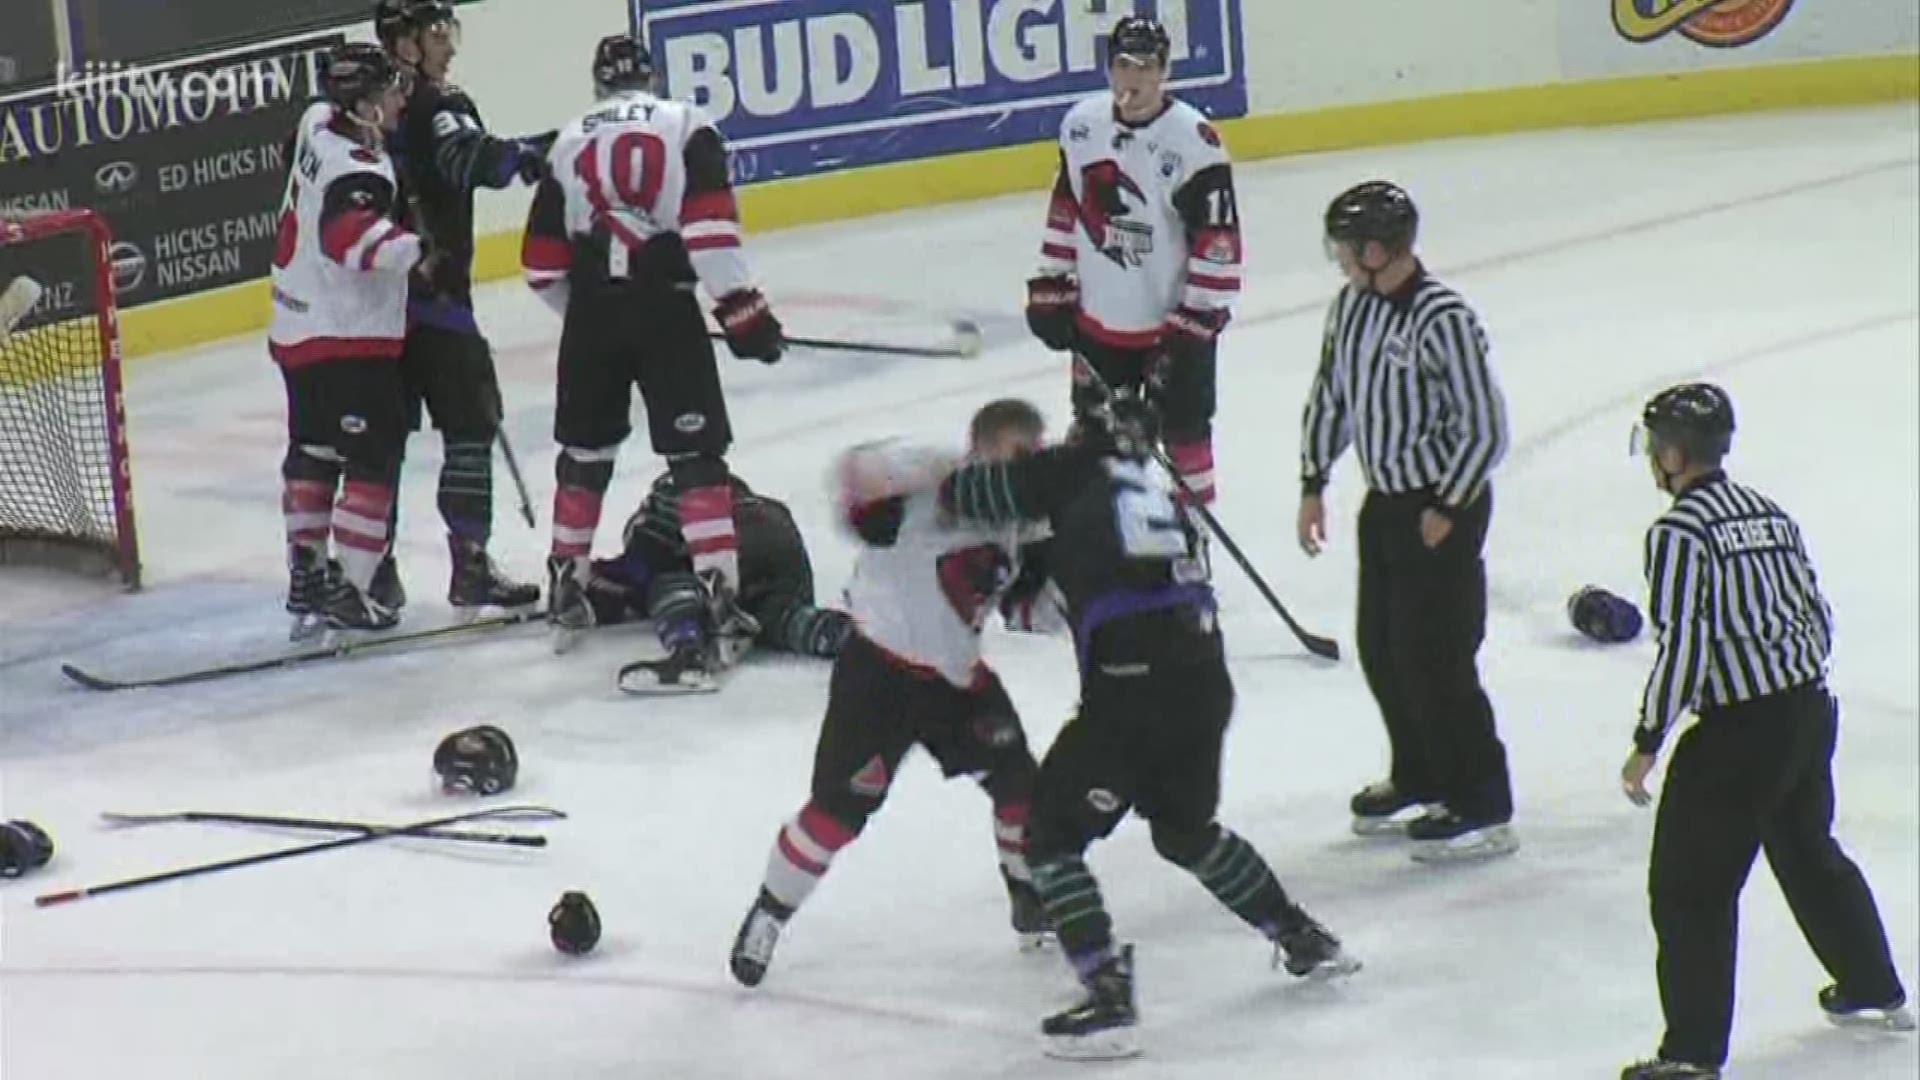 The Corpus Christi IceRays fought their way to an overtime win.